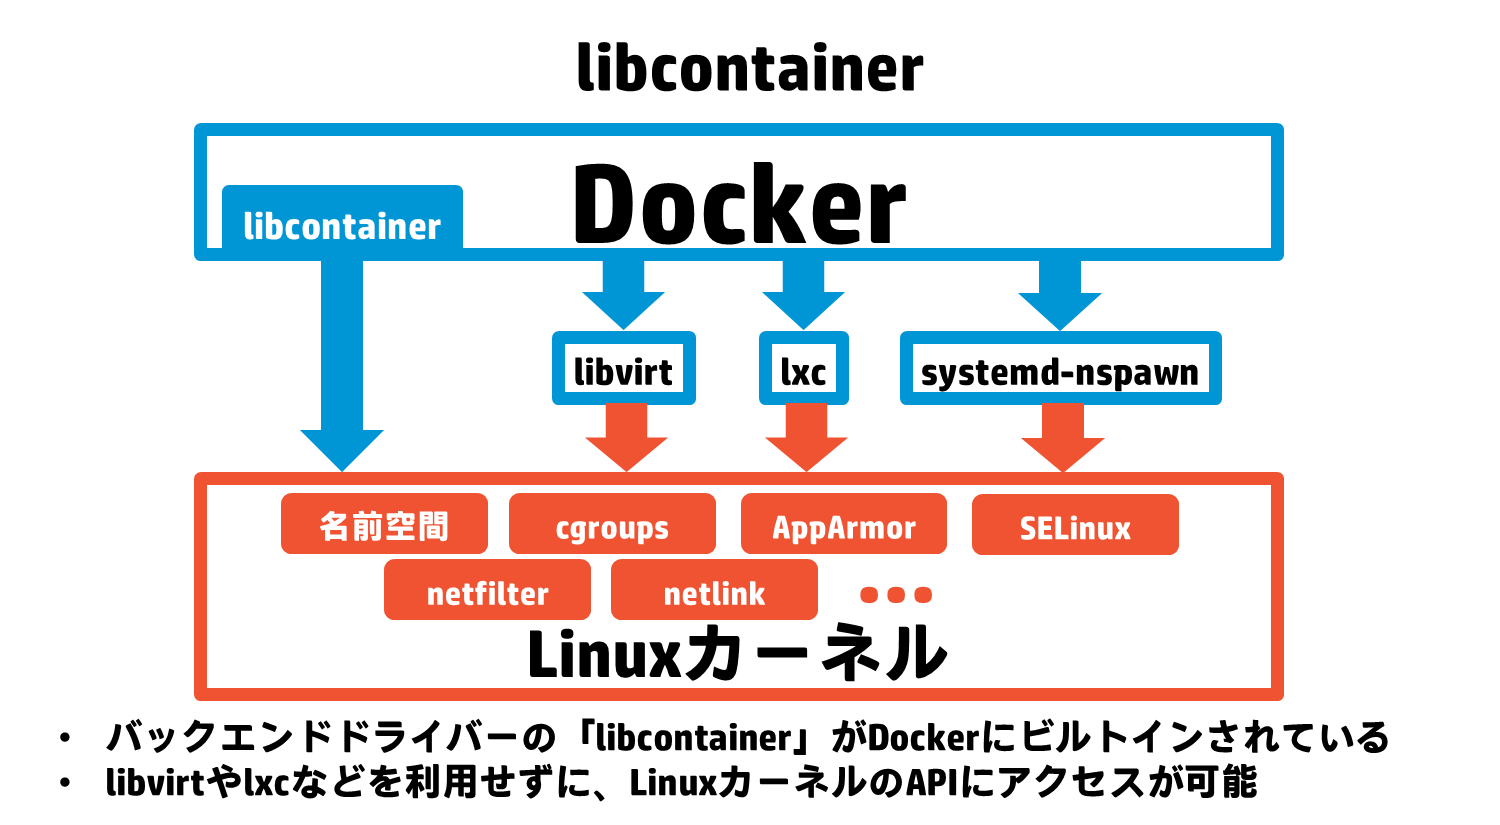 libcontainer